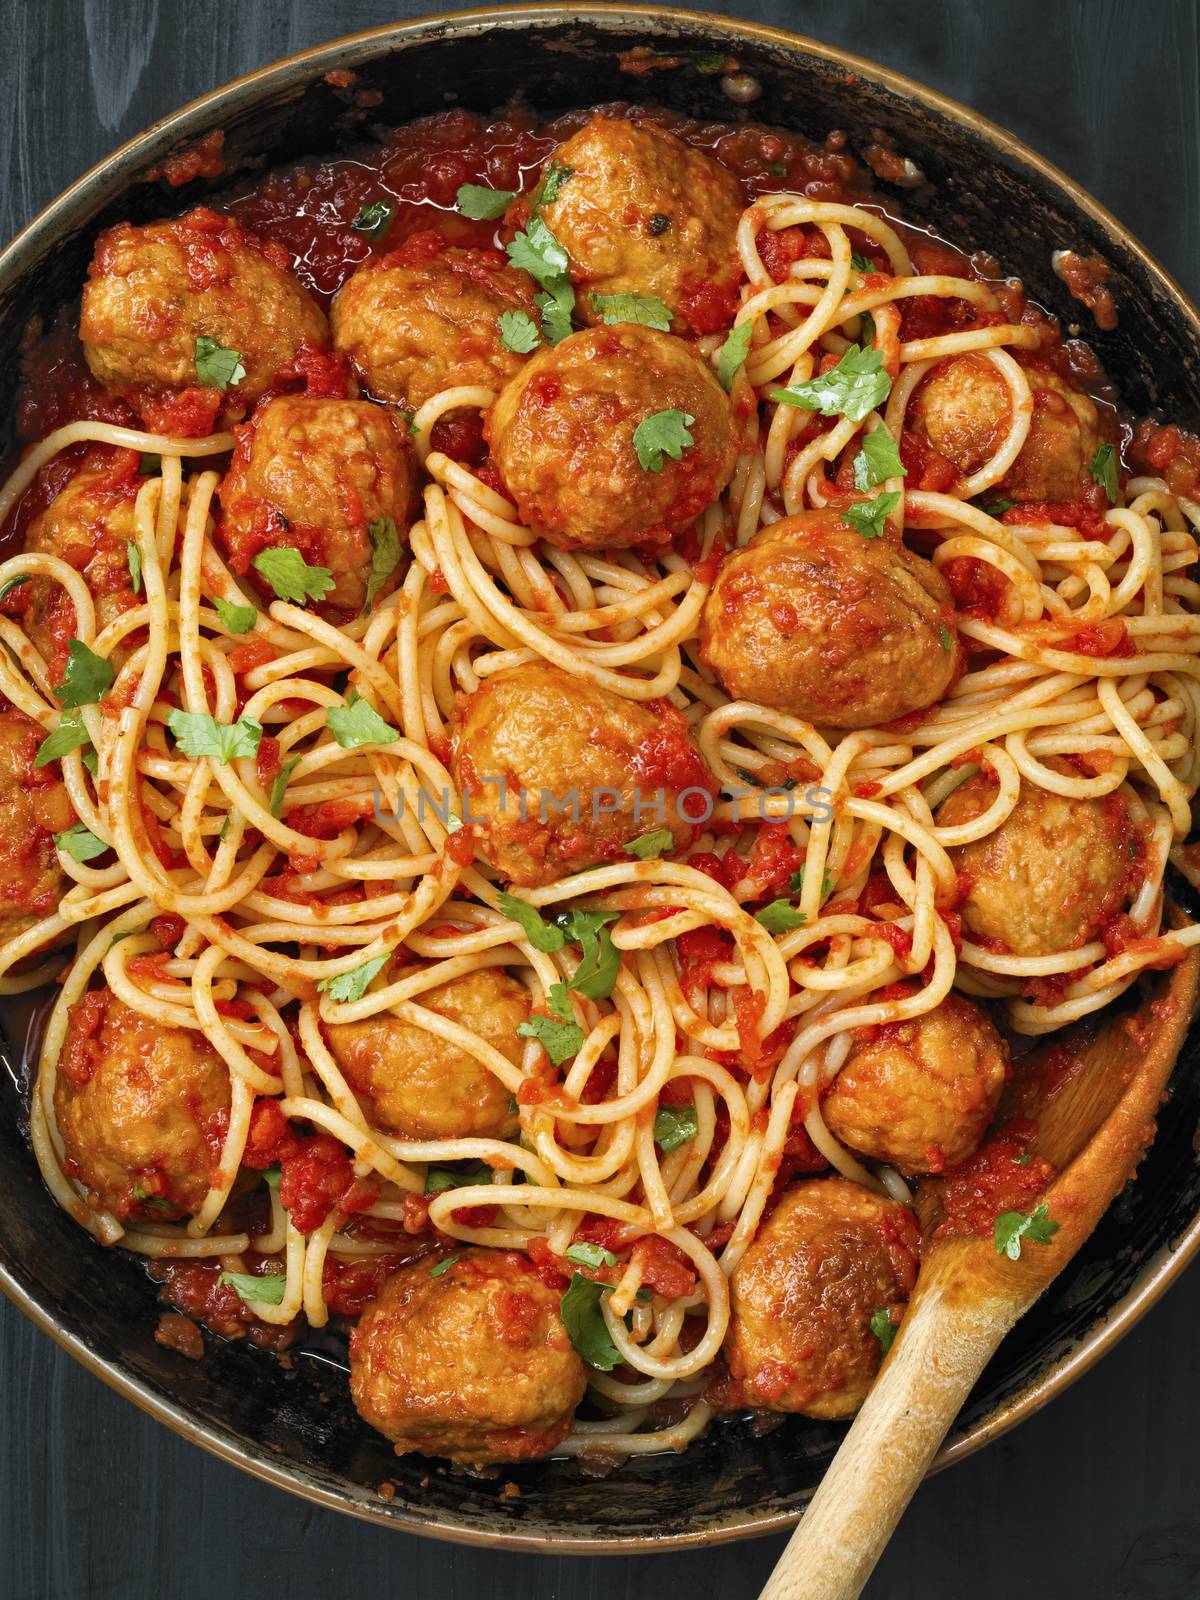 rustic meatball spaghetti in tomato sauce by zkruger